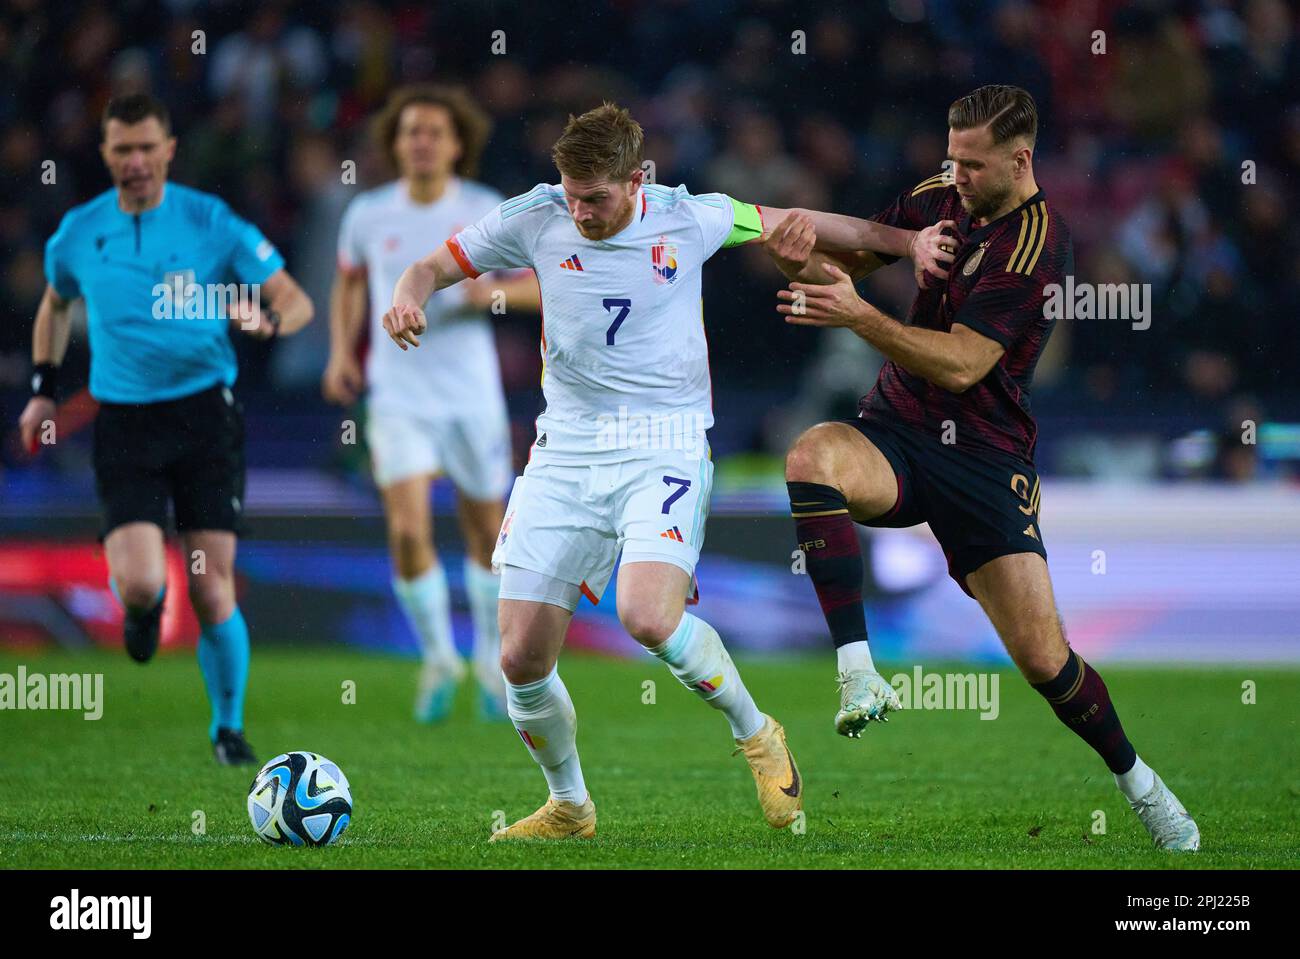 Kevin DE BRUYNE, Belgium Nr.7  compete for the ball, tackling, duel, header, zweikampf, action, fight against Emre Can, DFB 23  in the friendly match GERMANY - BELGIUM 2-3 Preparation for European Championships 2024 in Germany ,Season 2022/2023, on Mar 28, 2023  in Cologne, Köln, Germany.  © Peter Schatz / Alamy Live News Stock Photo